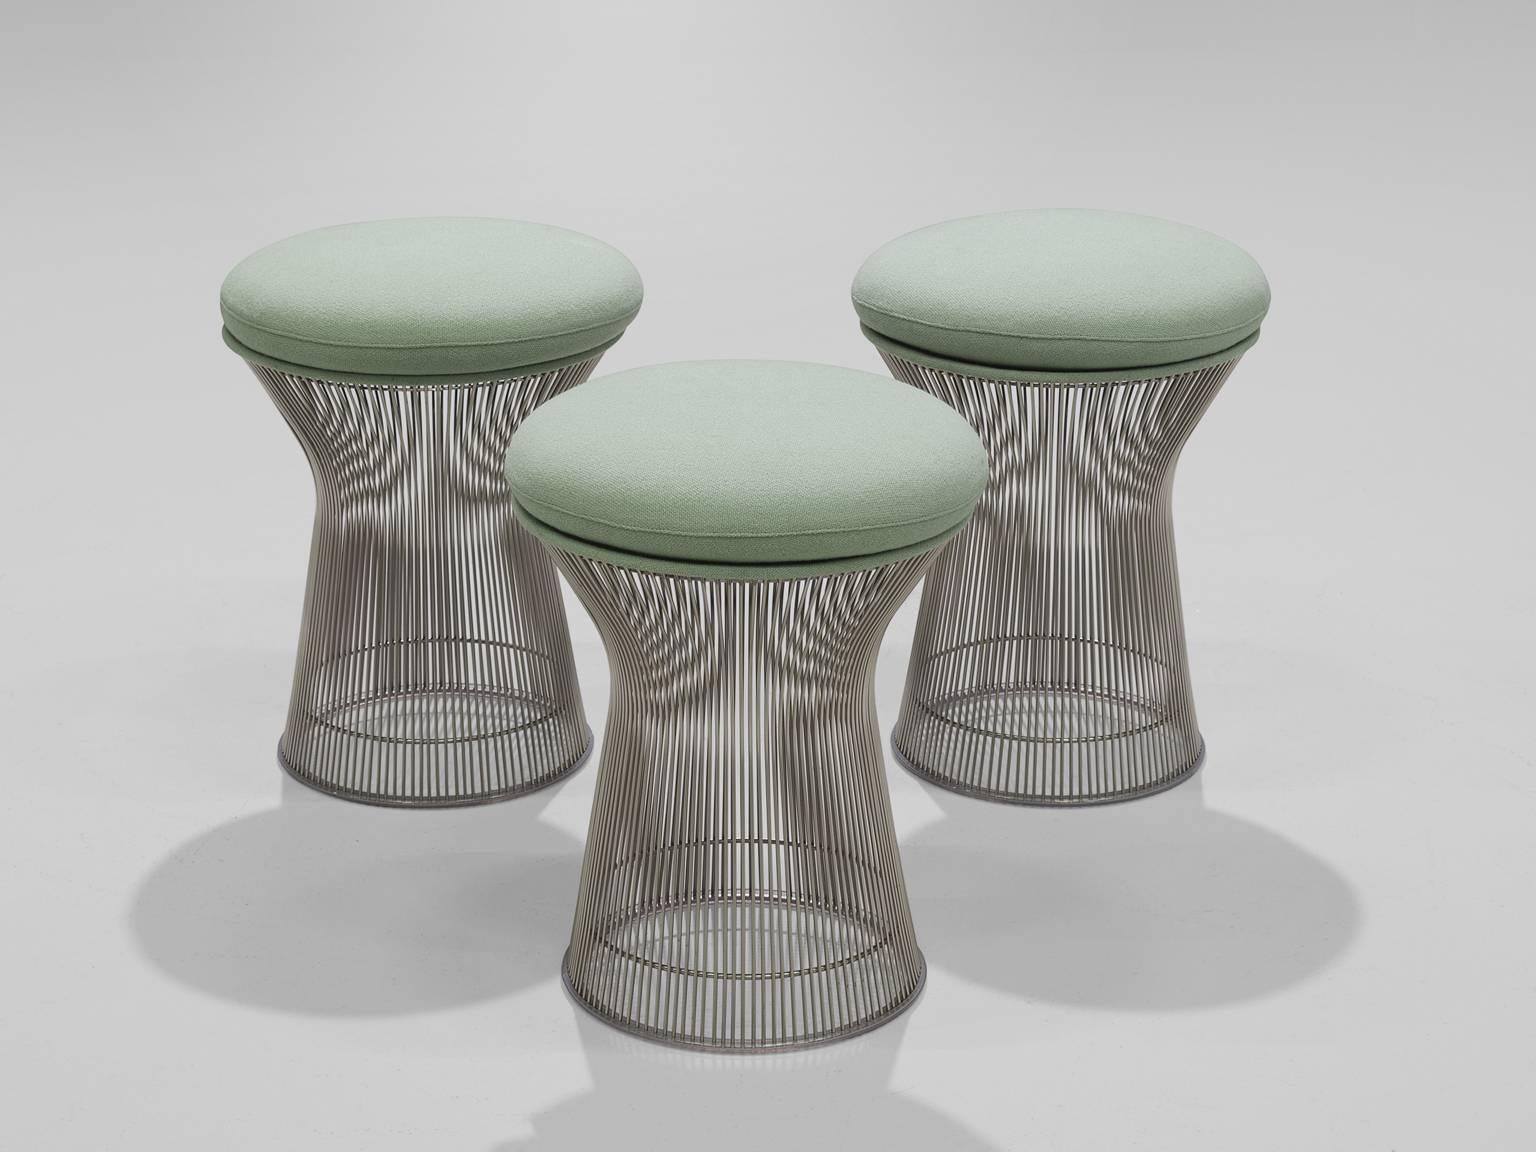 Warren Platner, three stools in metal and fabric, 1966, United States. 

This iconic mint green set of stools by Warren Platner (1919-2006) is created by welding curved steel rods to circular and semi-circular frames, simultaneously serving as